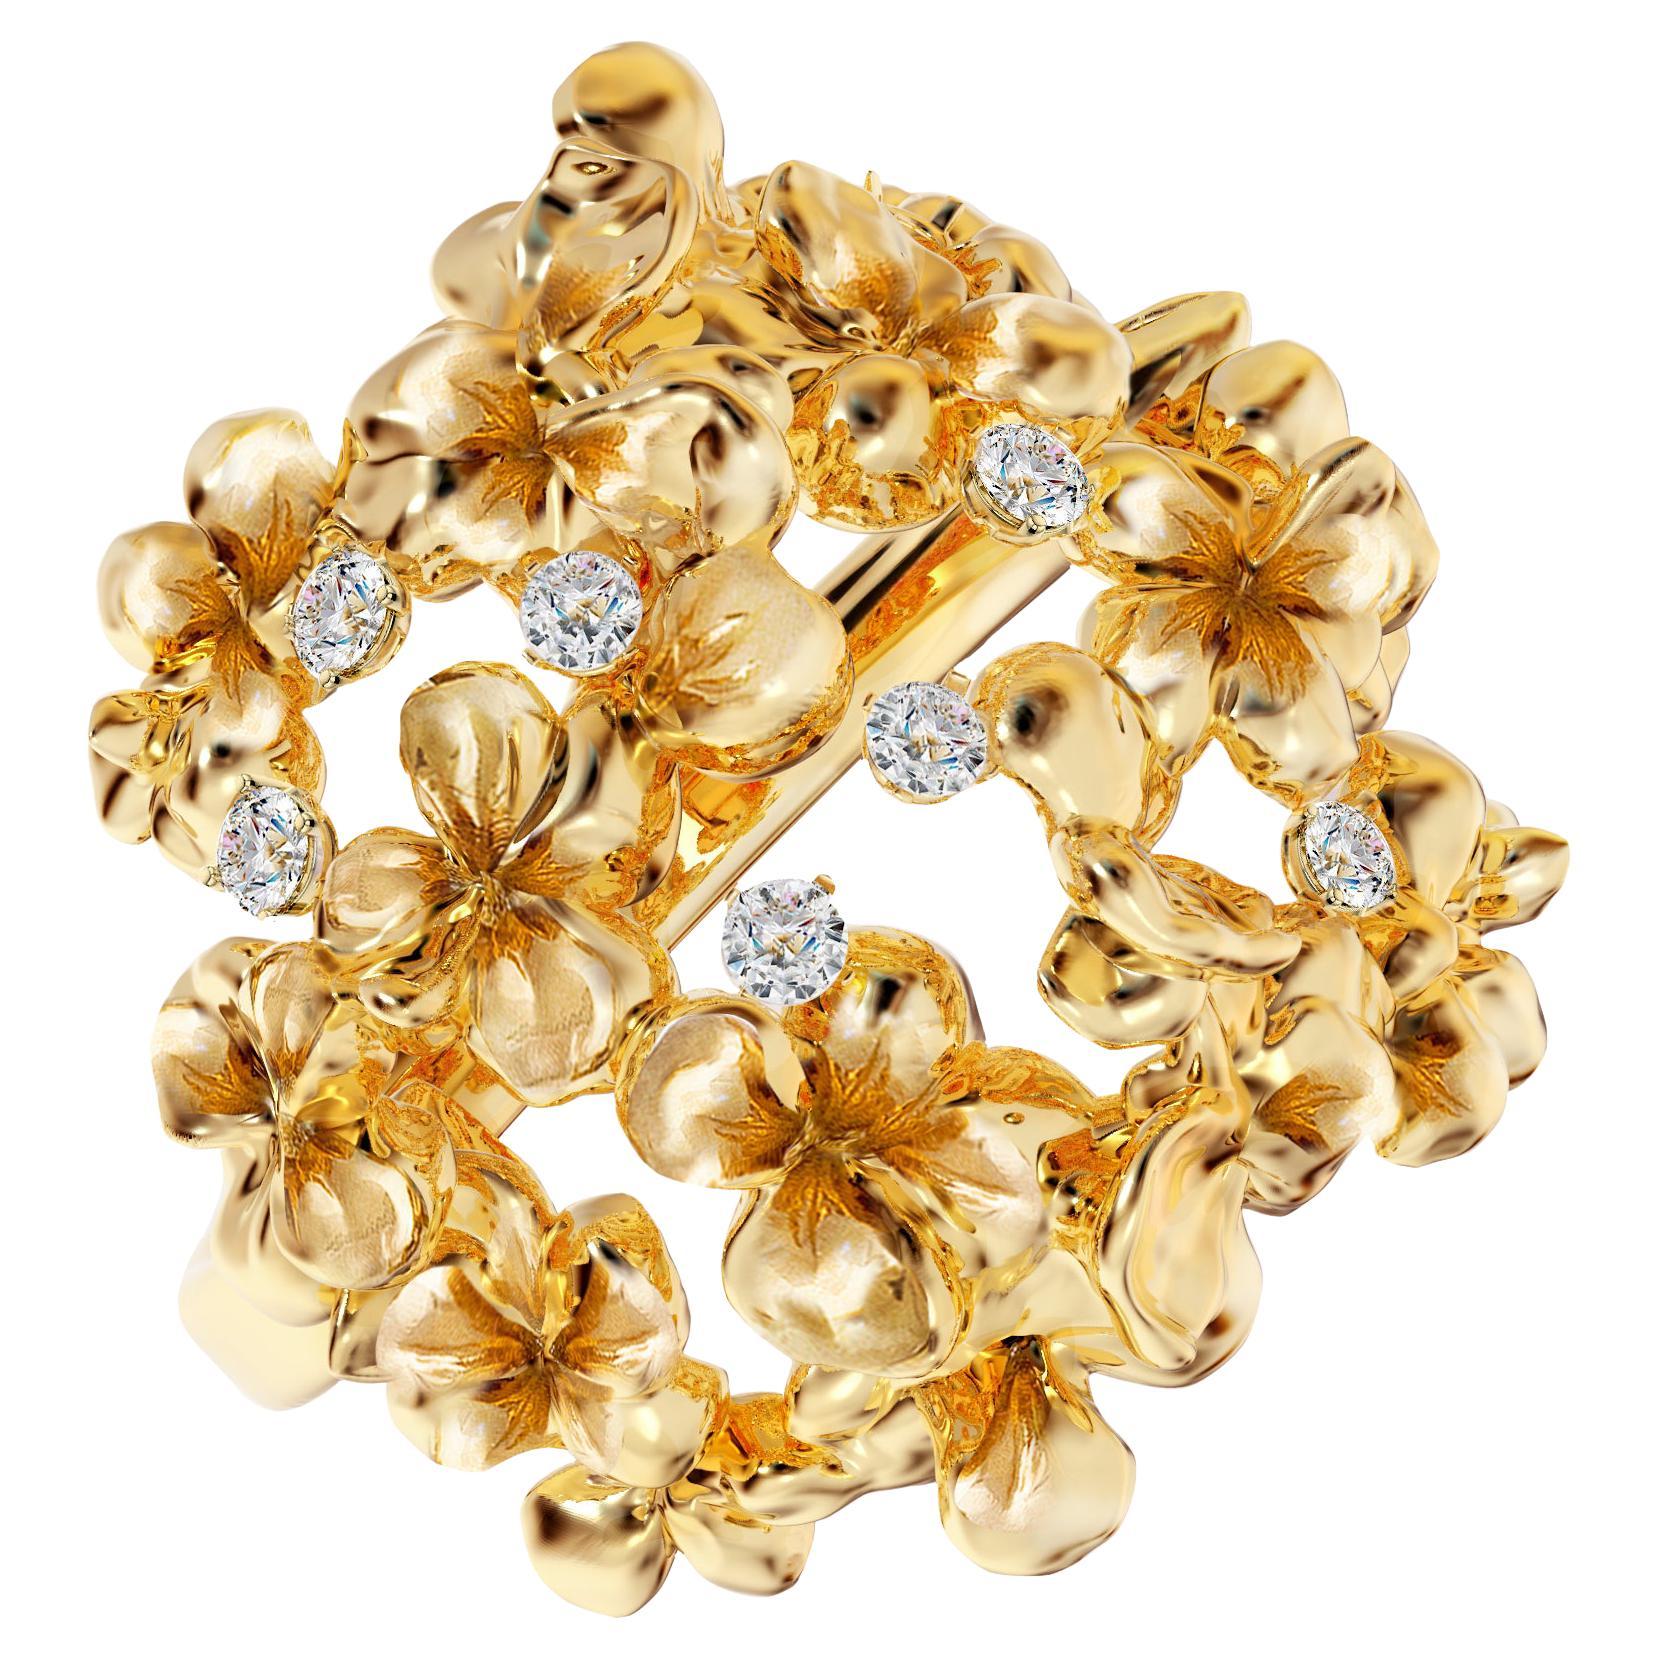 This contemporary Hortensia Sculptural brooch is in 18 karat yellow gold with 7 round natural diamonds, VS, F-G. The sculptural design adds the extra highlights to the surface of the gold. The diamonds add the delicate blinks. This jewellery